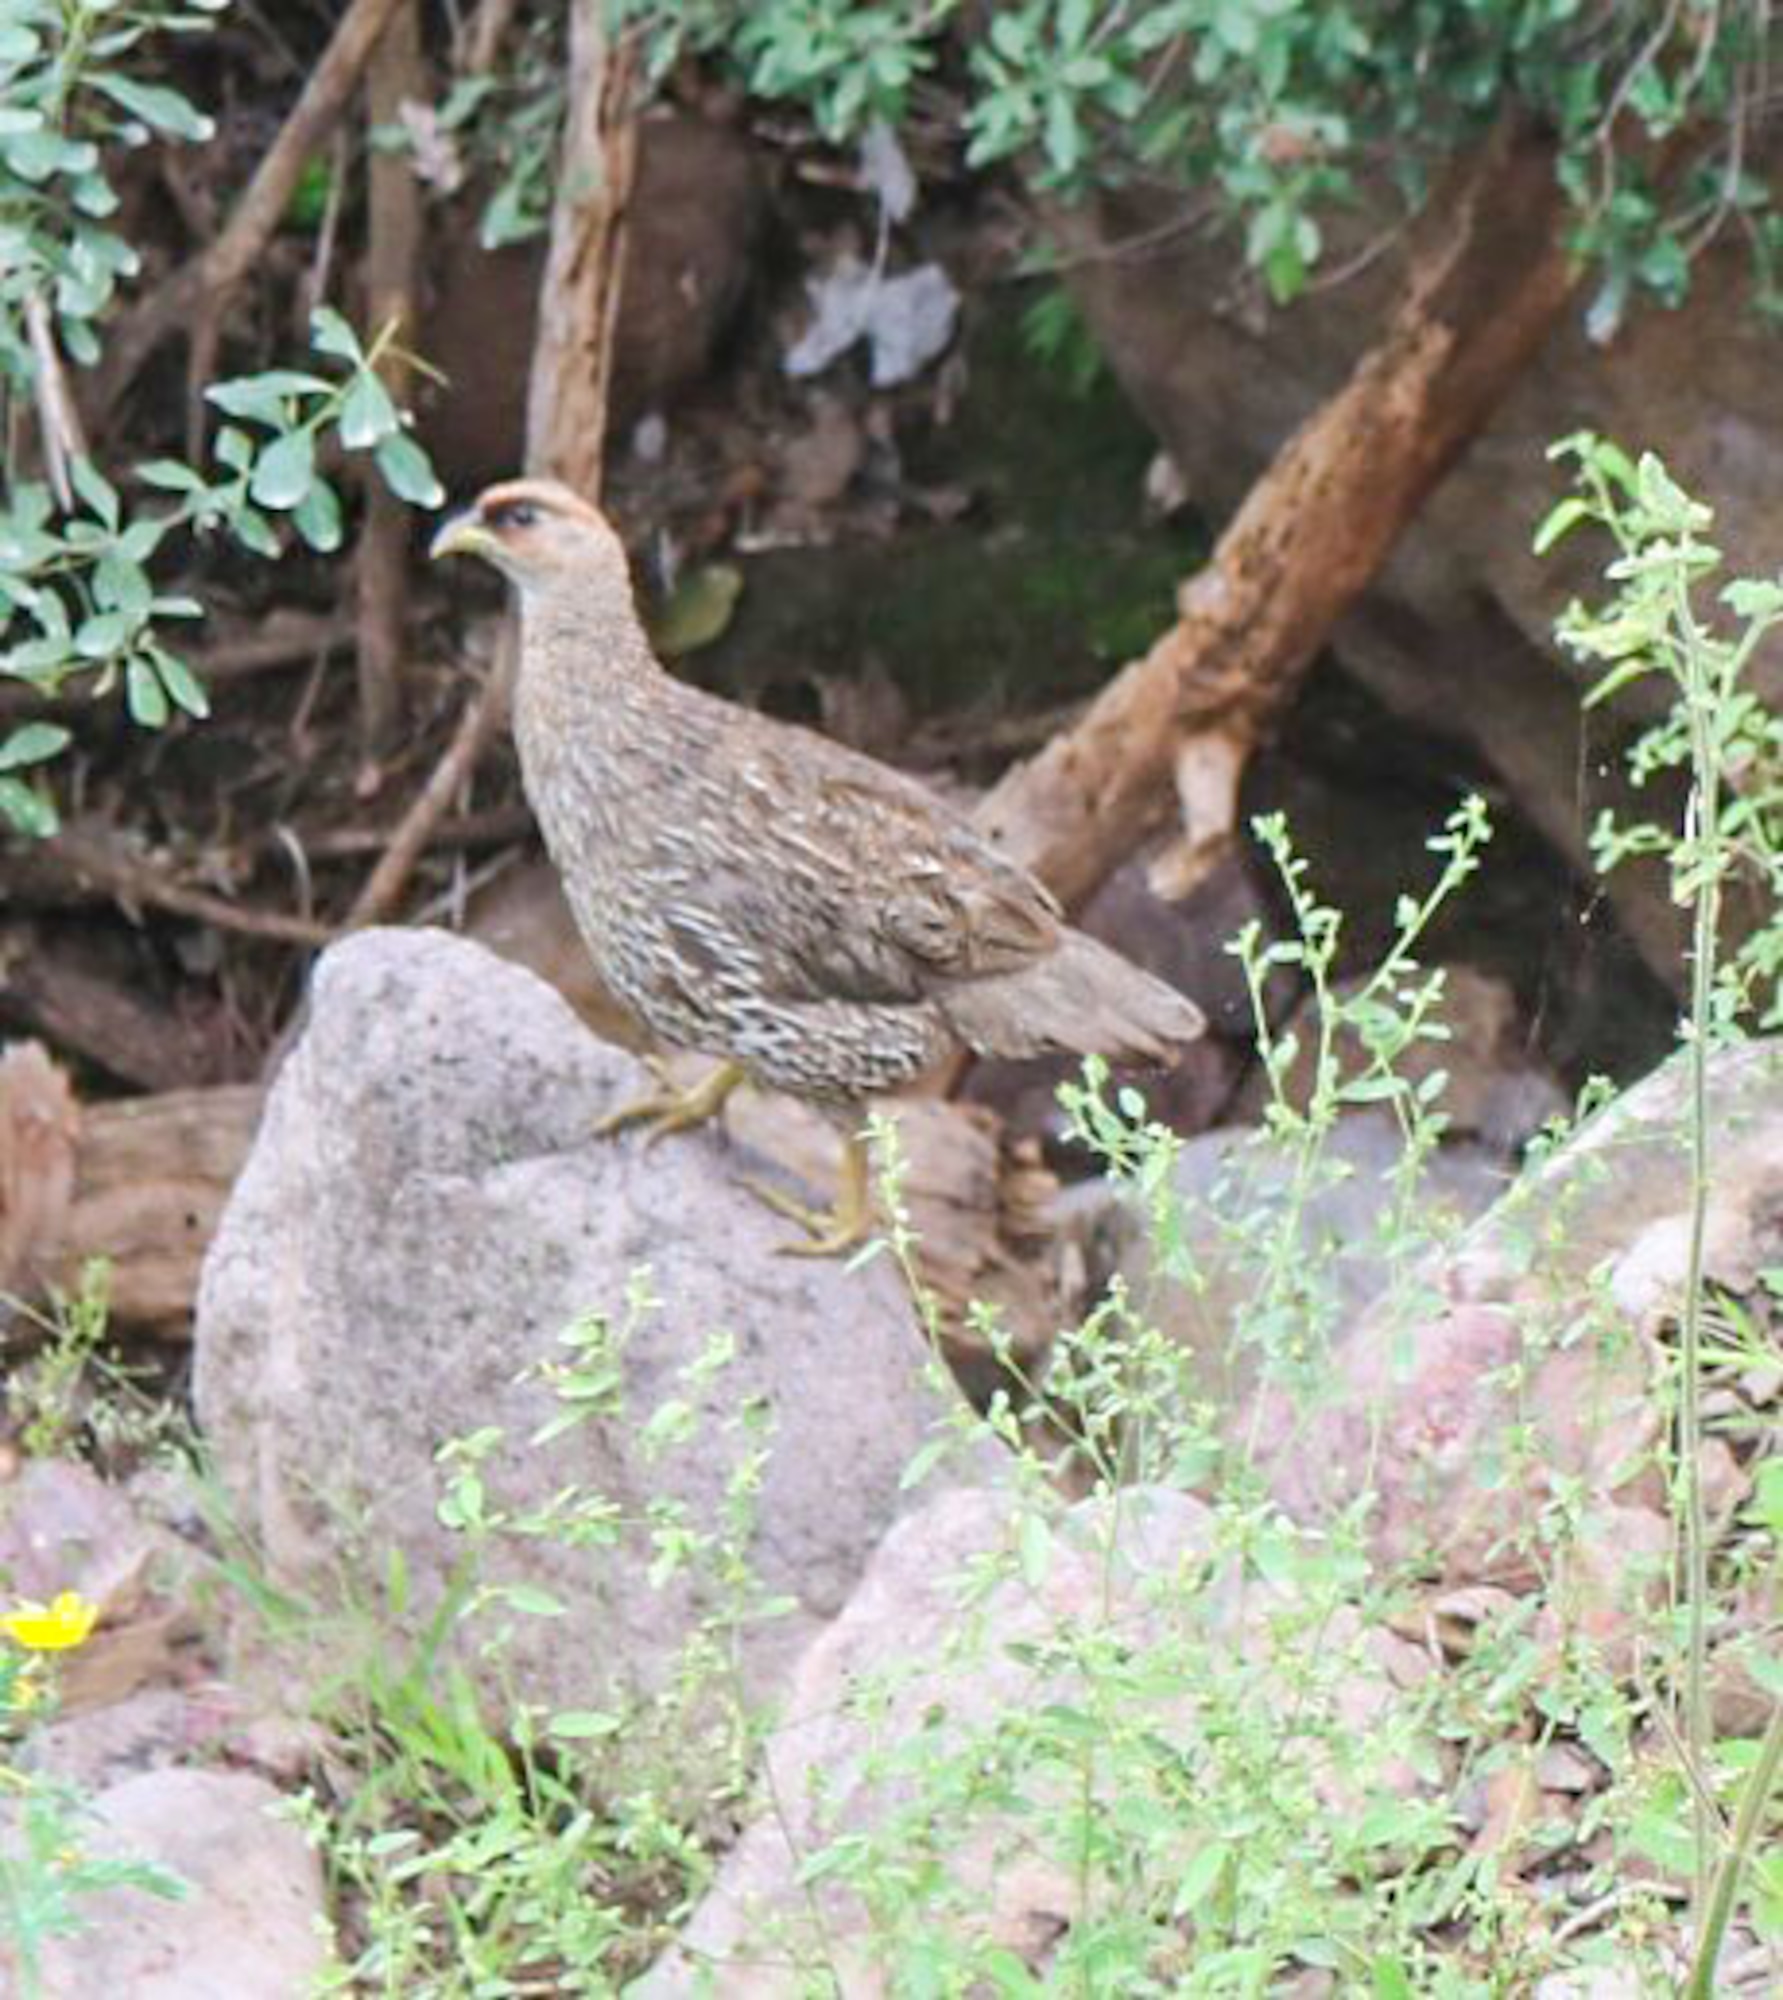 A photo of the critically endangered Djibouti Spurfowl, which is believed to have as few as 250-500 individuals remaining in the wild, and is Djibouti’s only unique, or endemic species.